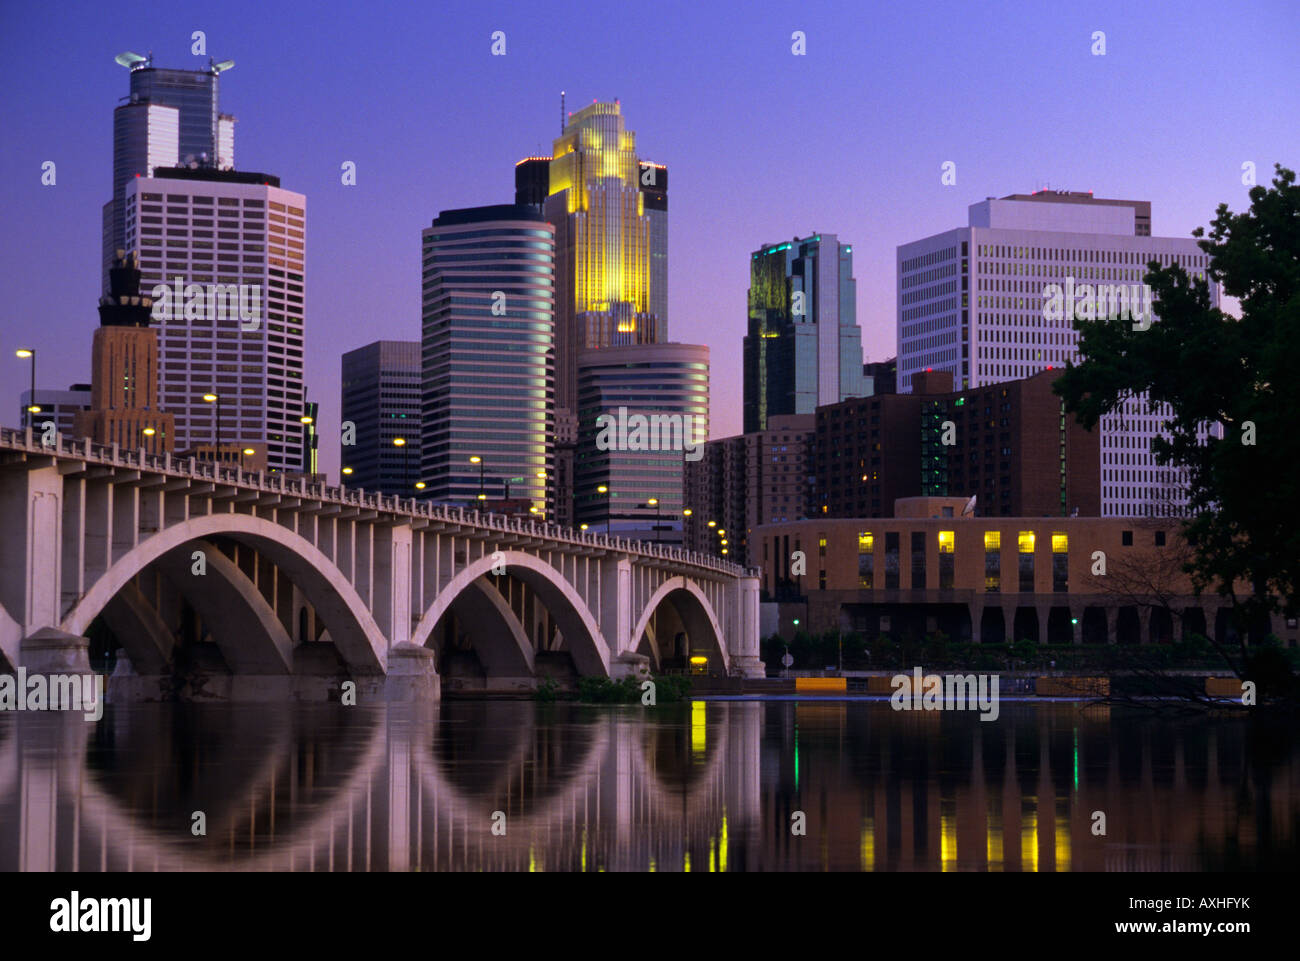 SKYLINE OF MINNEAPOLIS, MINNESOTA, THE MISSISSIPPI RIVER AND THE THIRD AVENUE-CENTRAL AVENUE BRIDGE.  DUSK; SUMMER. Stock Photo